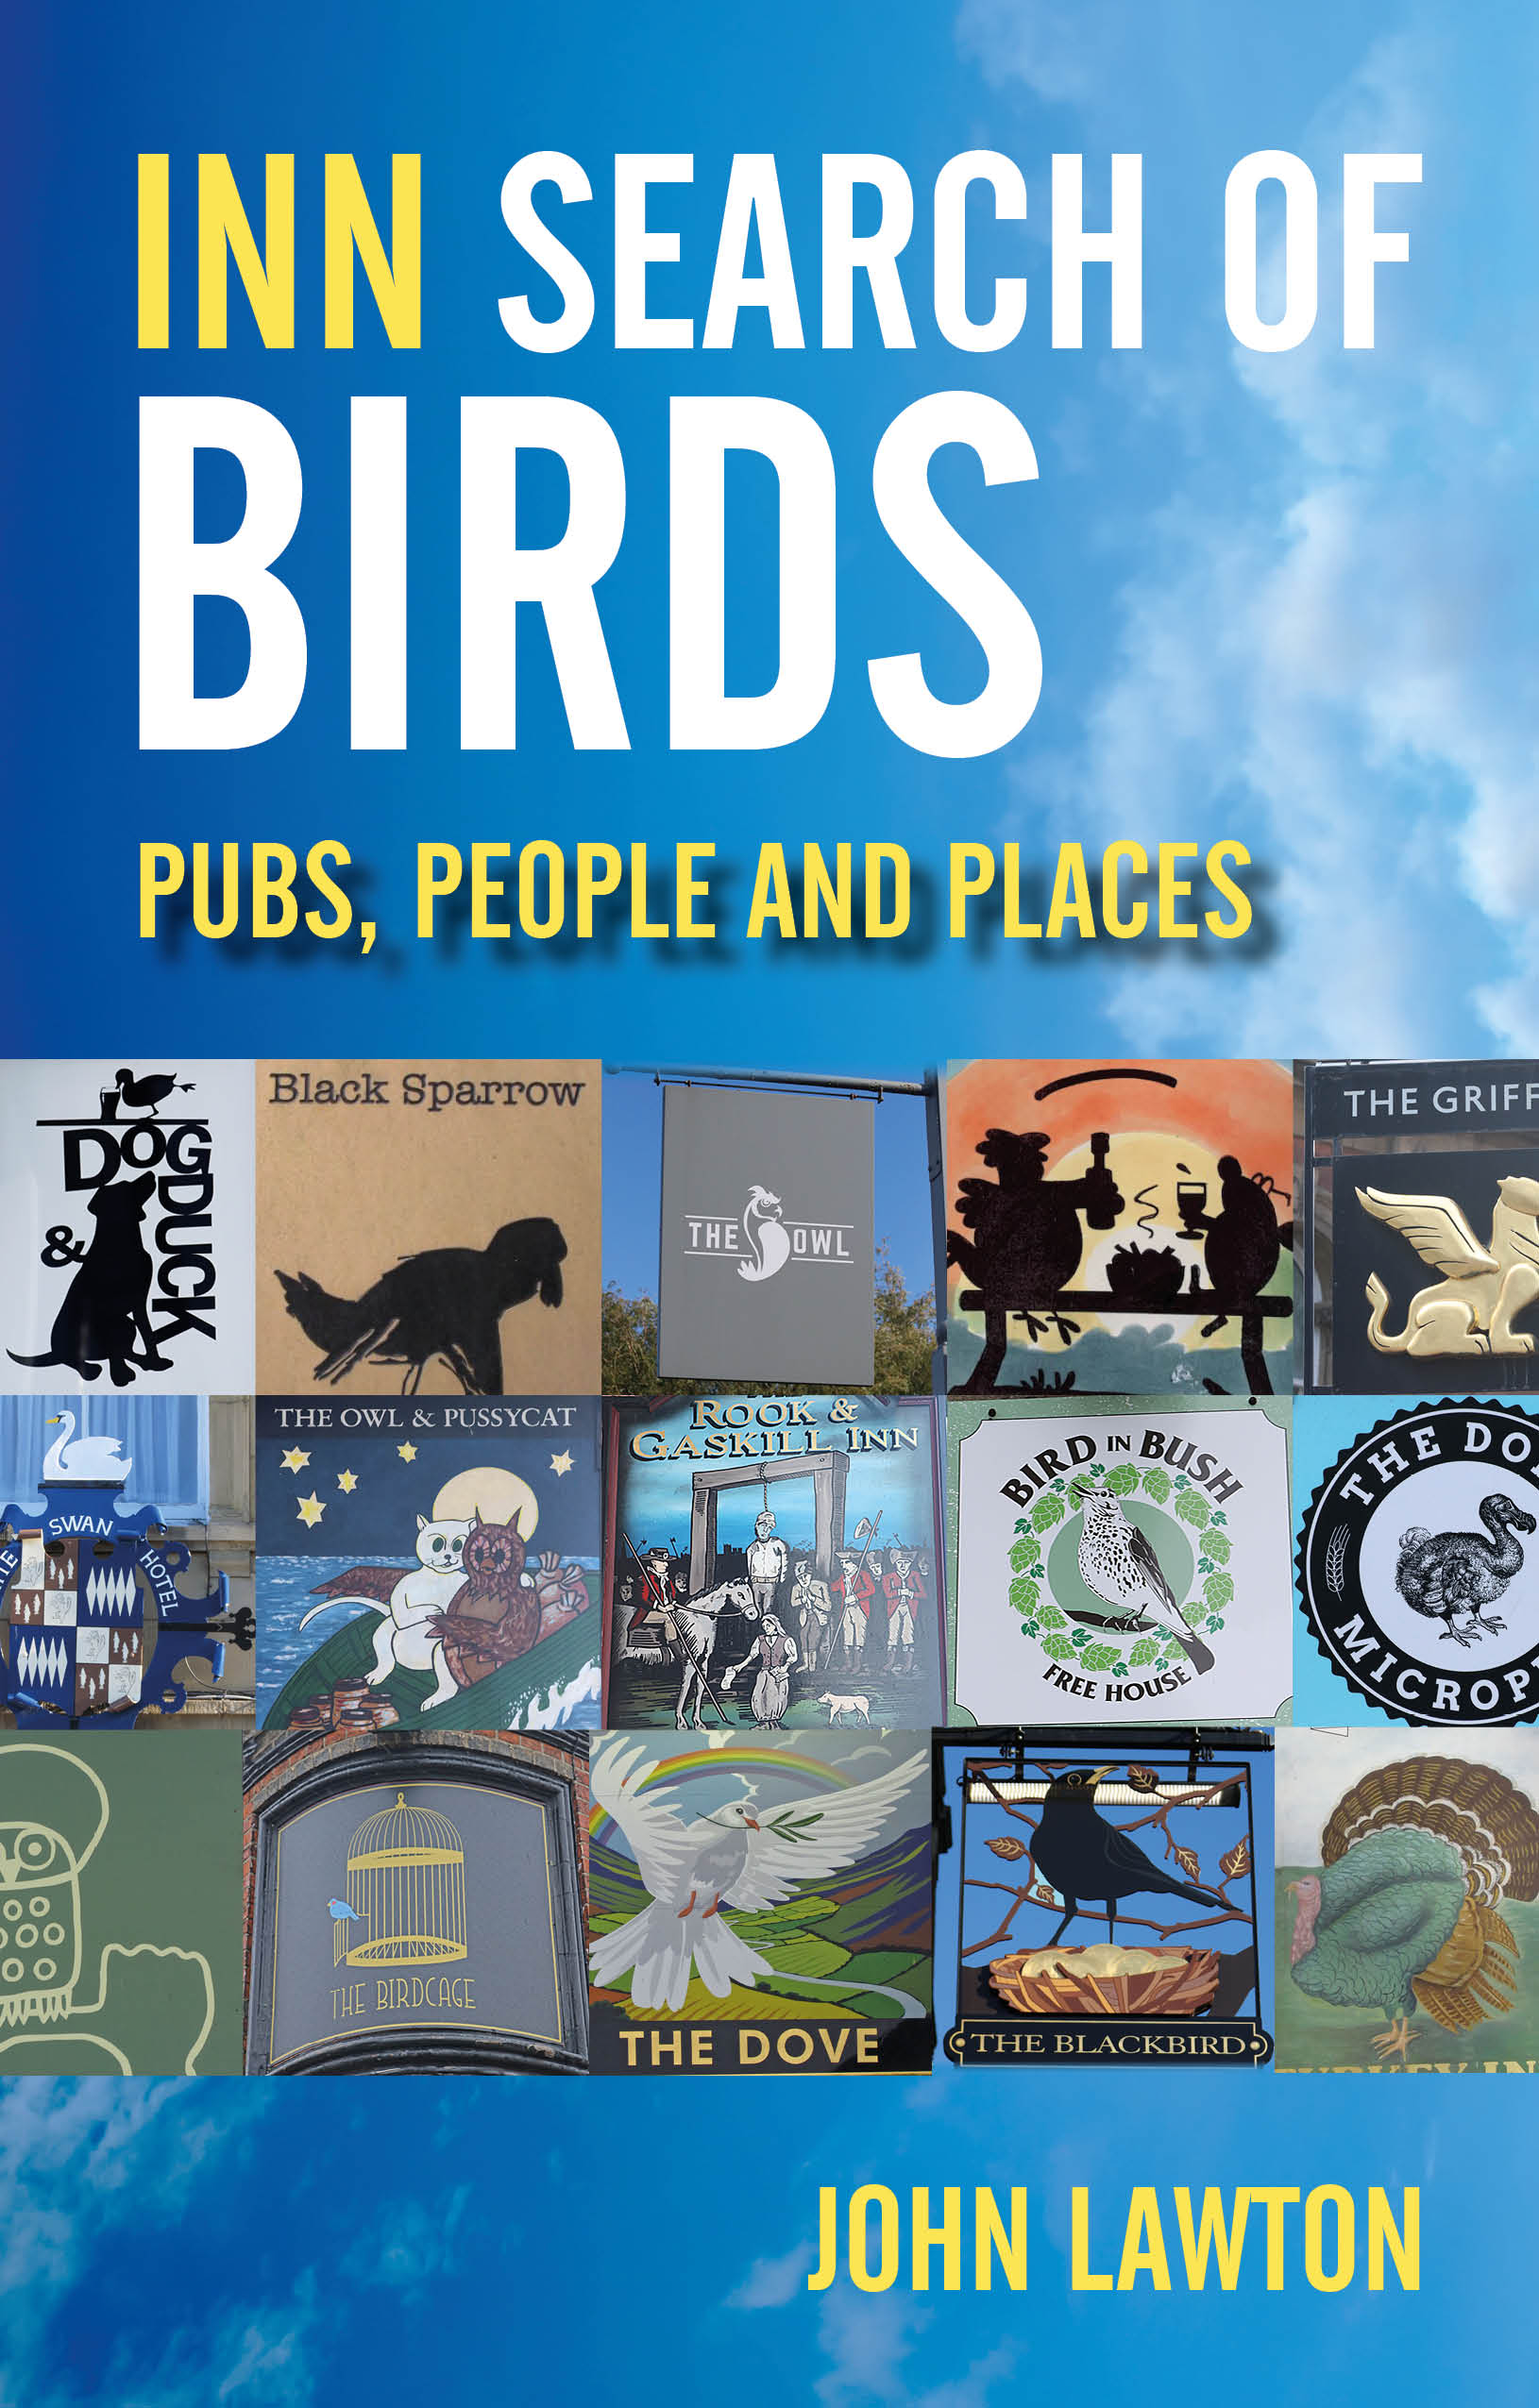 Inn_Search_of_Birds_pubs_people_and_places_book_cover